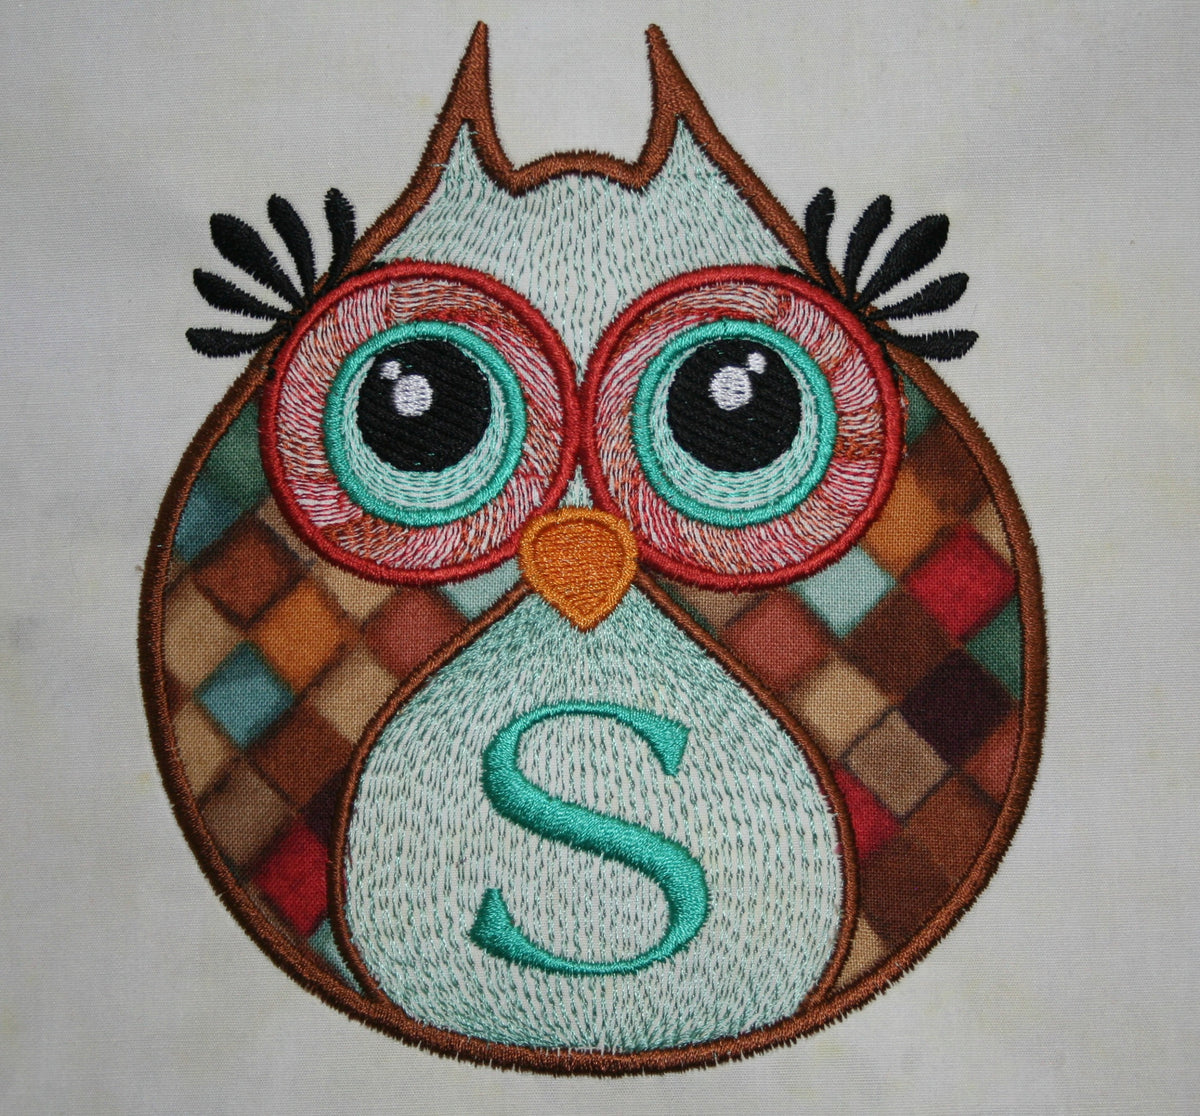 Download Hooty Owl Applique Embroidery Design - SewMichelle